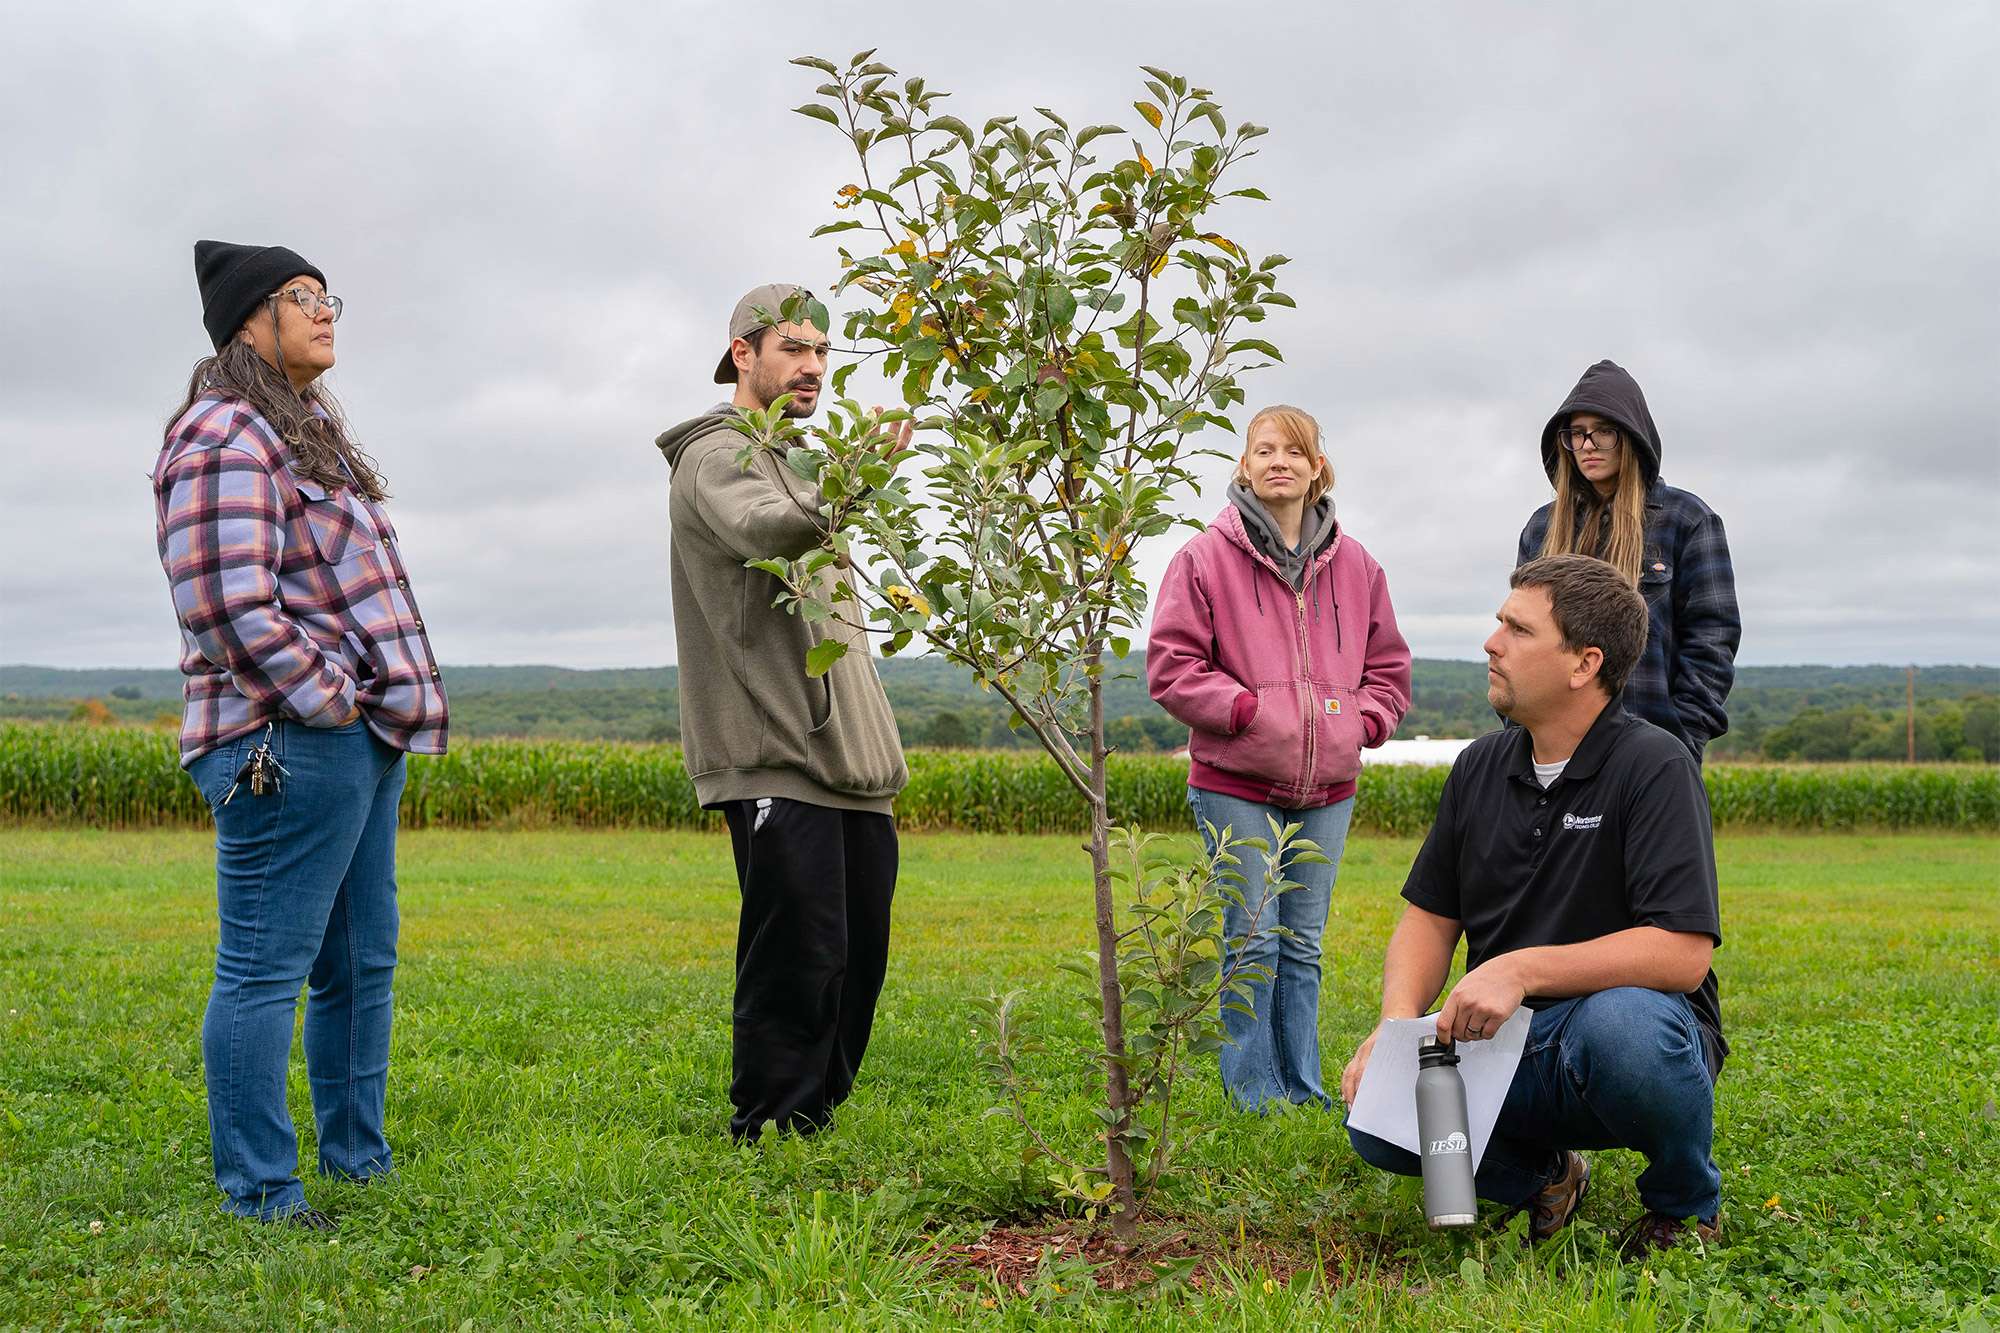 A small group of students and farmers are observing a small apple tree together.